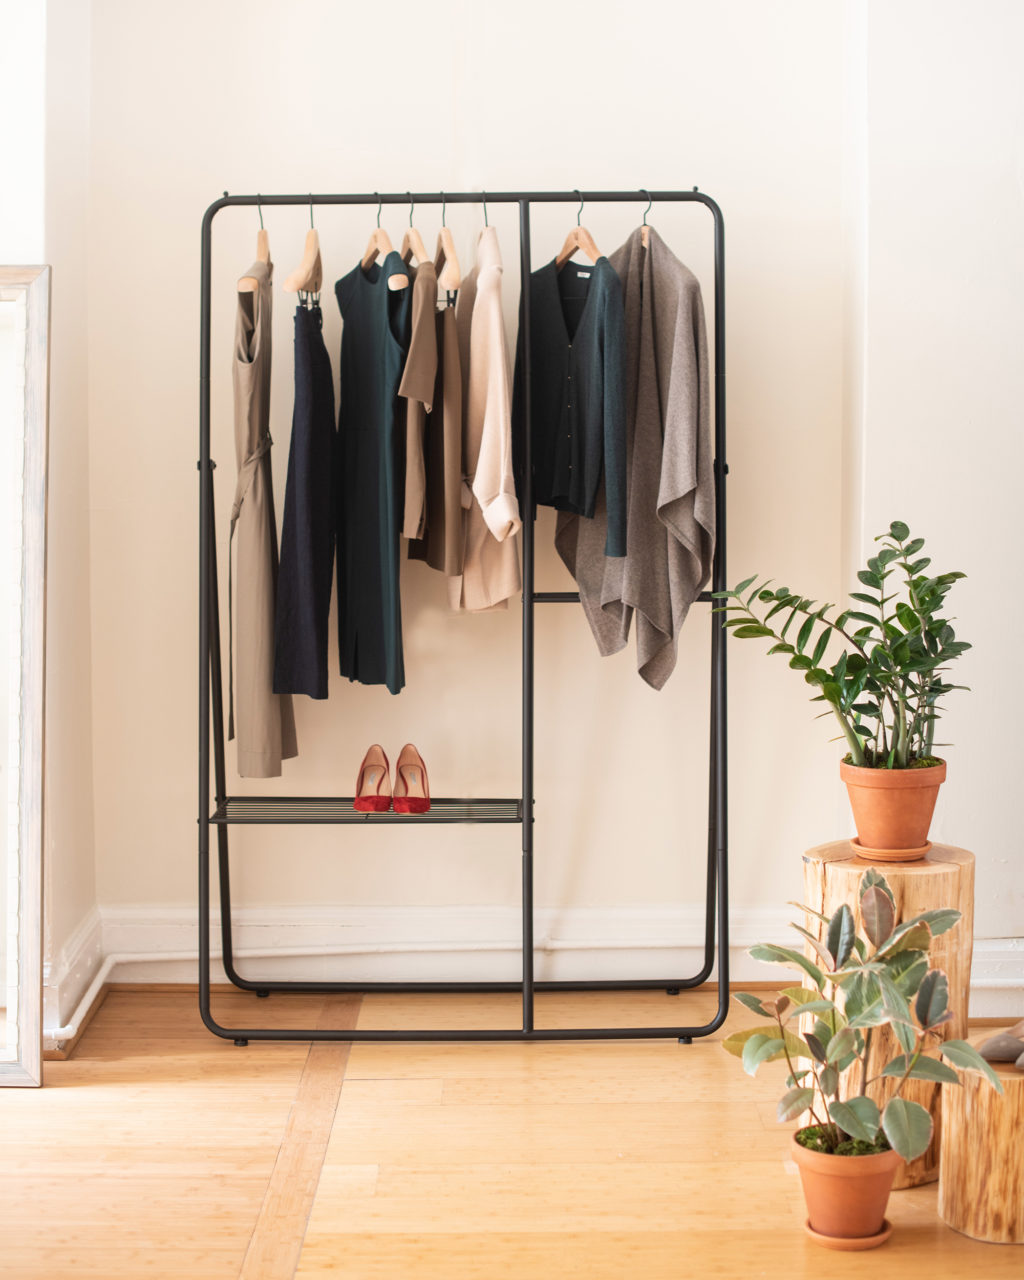 Our Ultimate Guide to Organizing Your Closet the M.M. Way